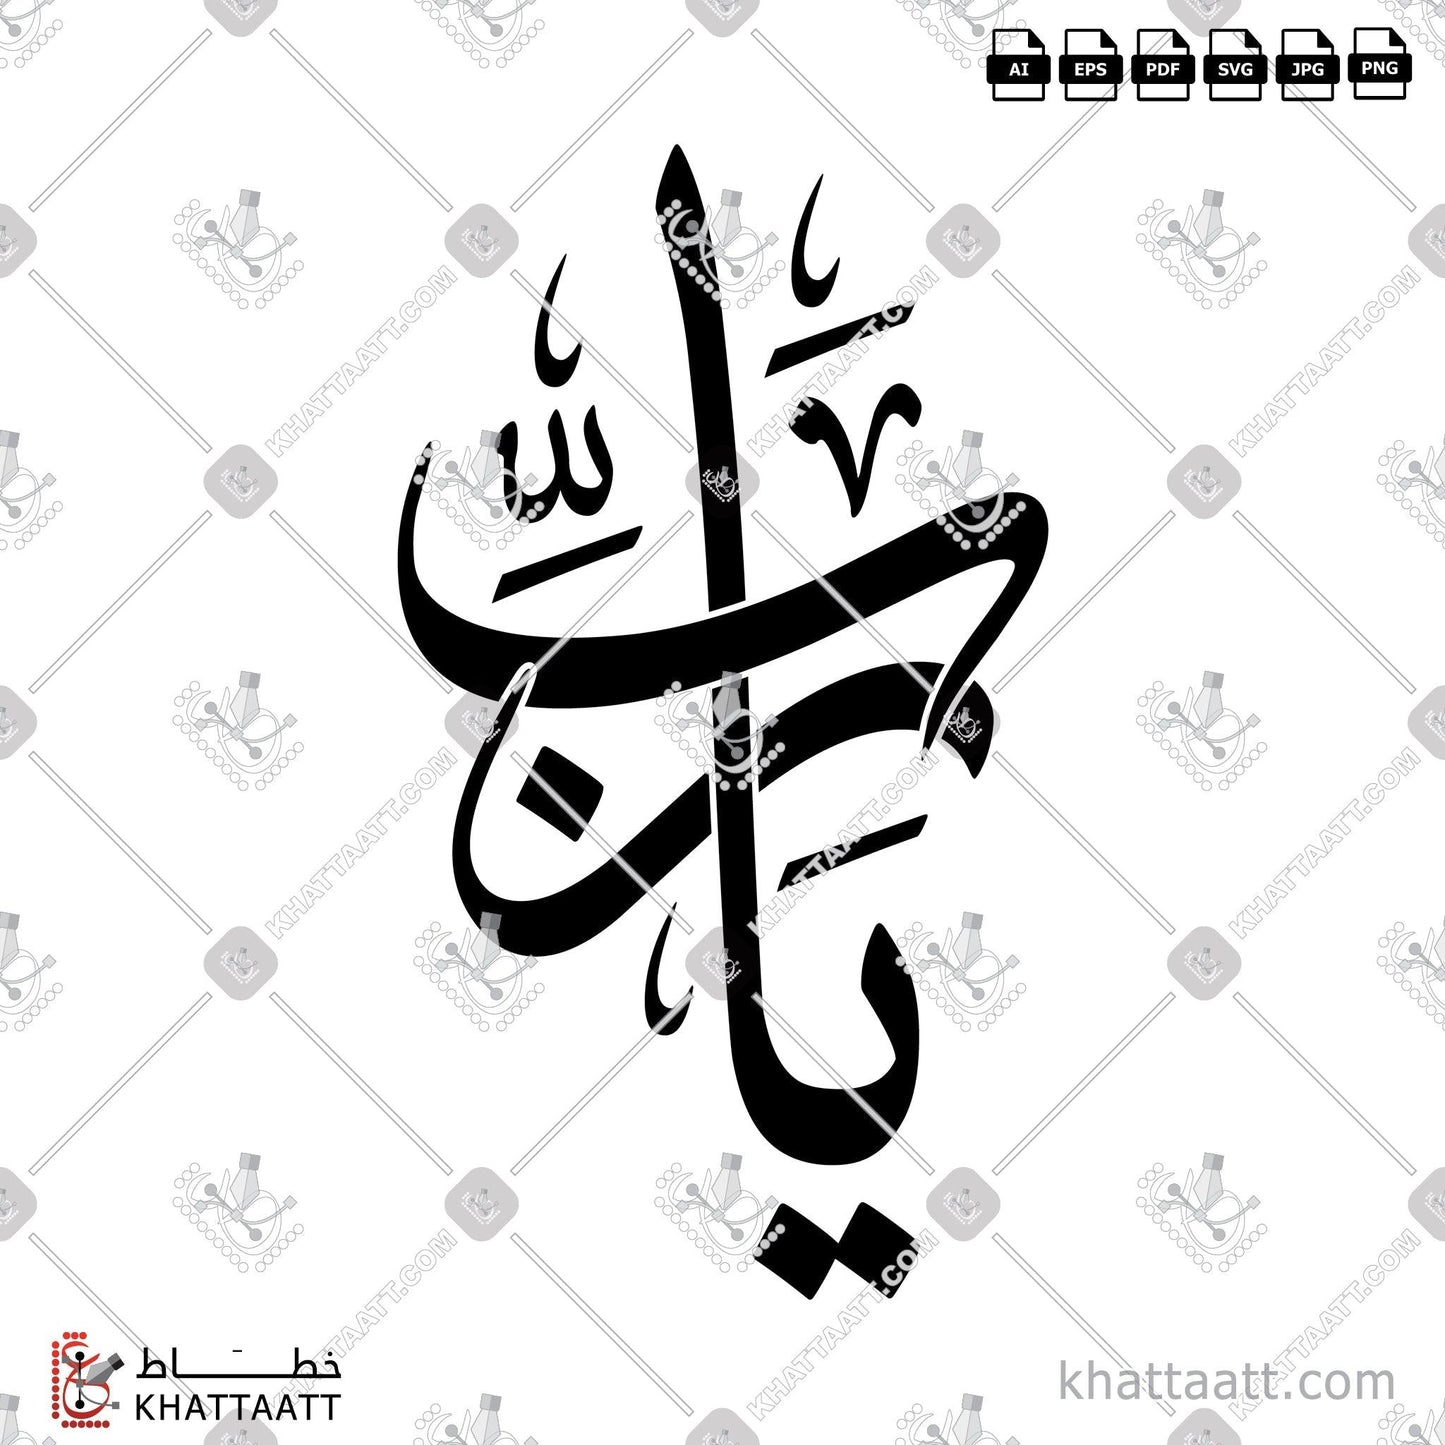 Download Arabic Calligraphy of Ya Rab - يا رب in Thuluth - خط الثلث in vector and .png